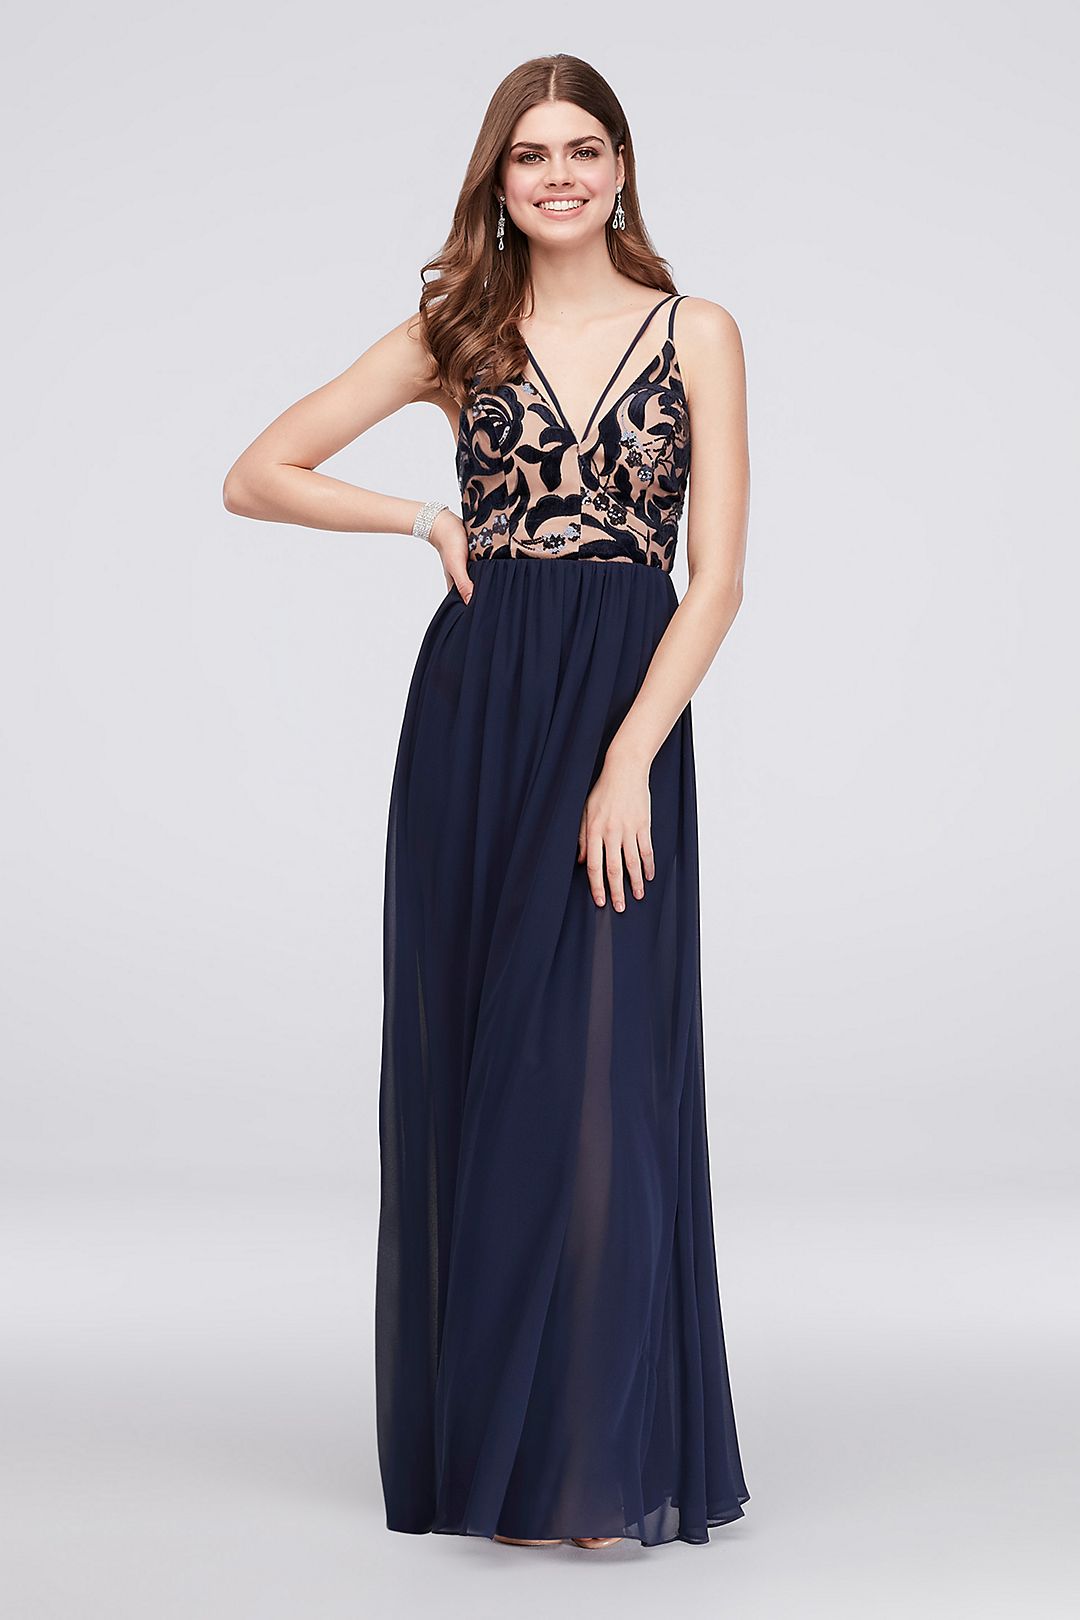 Velvet and Sequin Bodice A-Line Gown Image 1